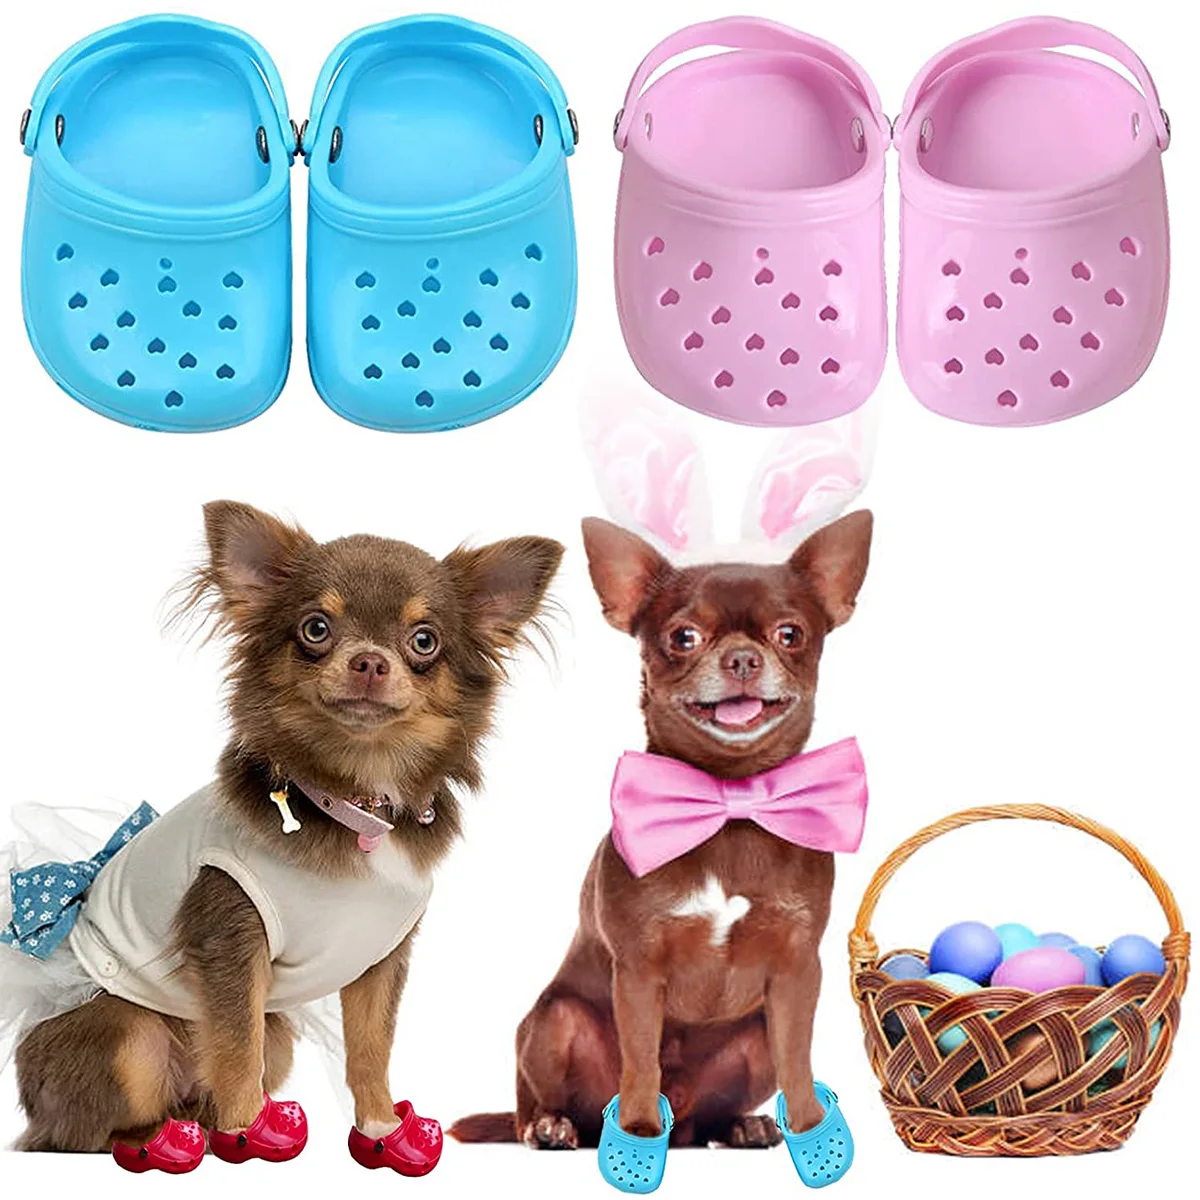 NEW 1 Pair Pet Dog Shoes Breathable Mesh Dog Sandals Lovely Holey Comfortable Puppy Slippers with Rugged Anti-Slip Sole Candy